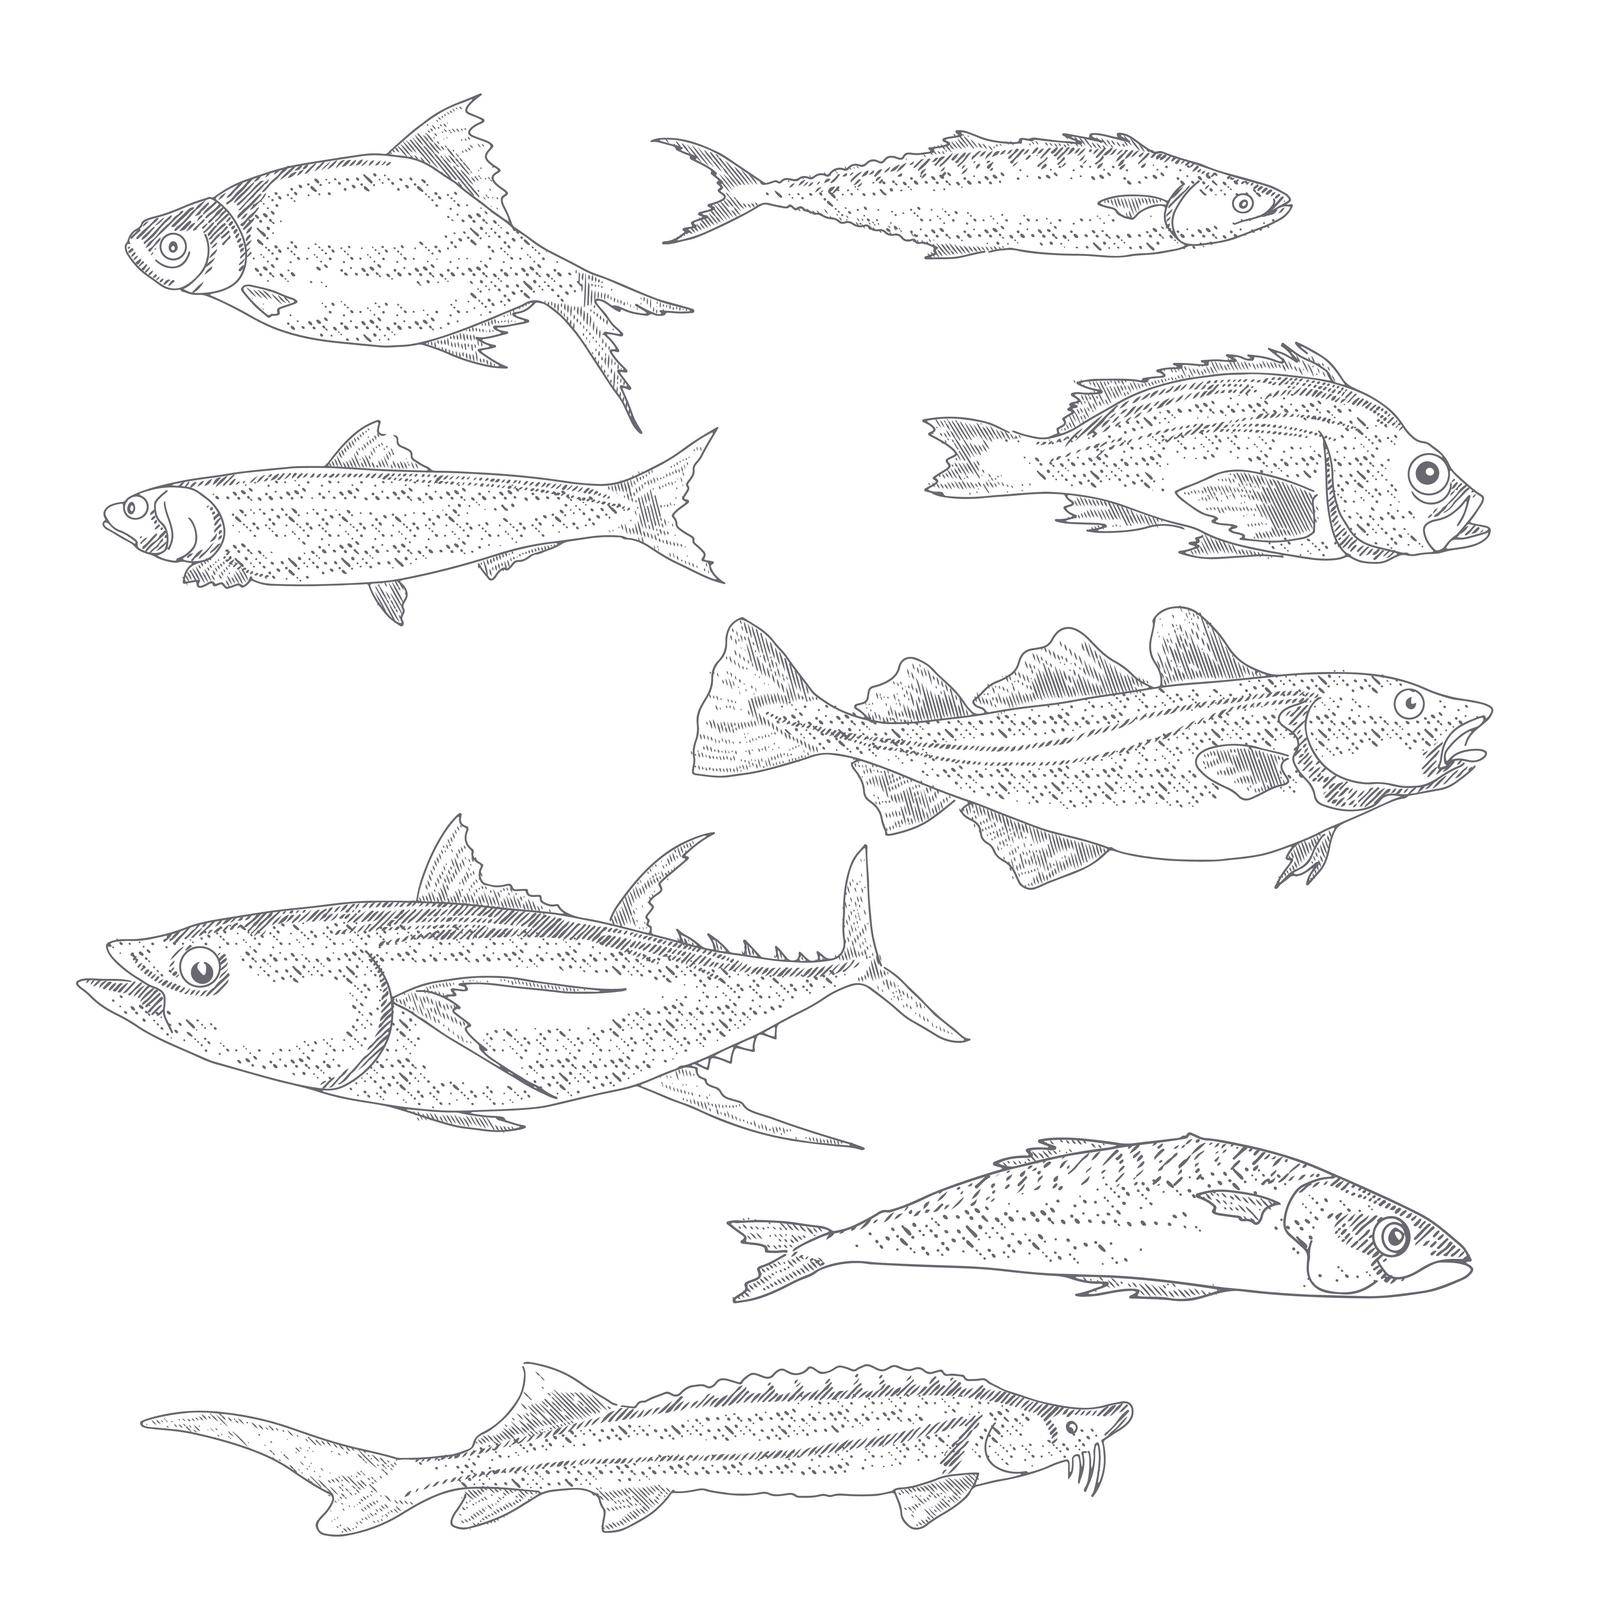 A set of river and sea fishing. Collection of fish in engraving style, isolated on a white background